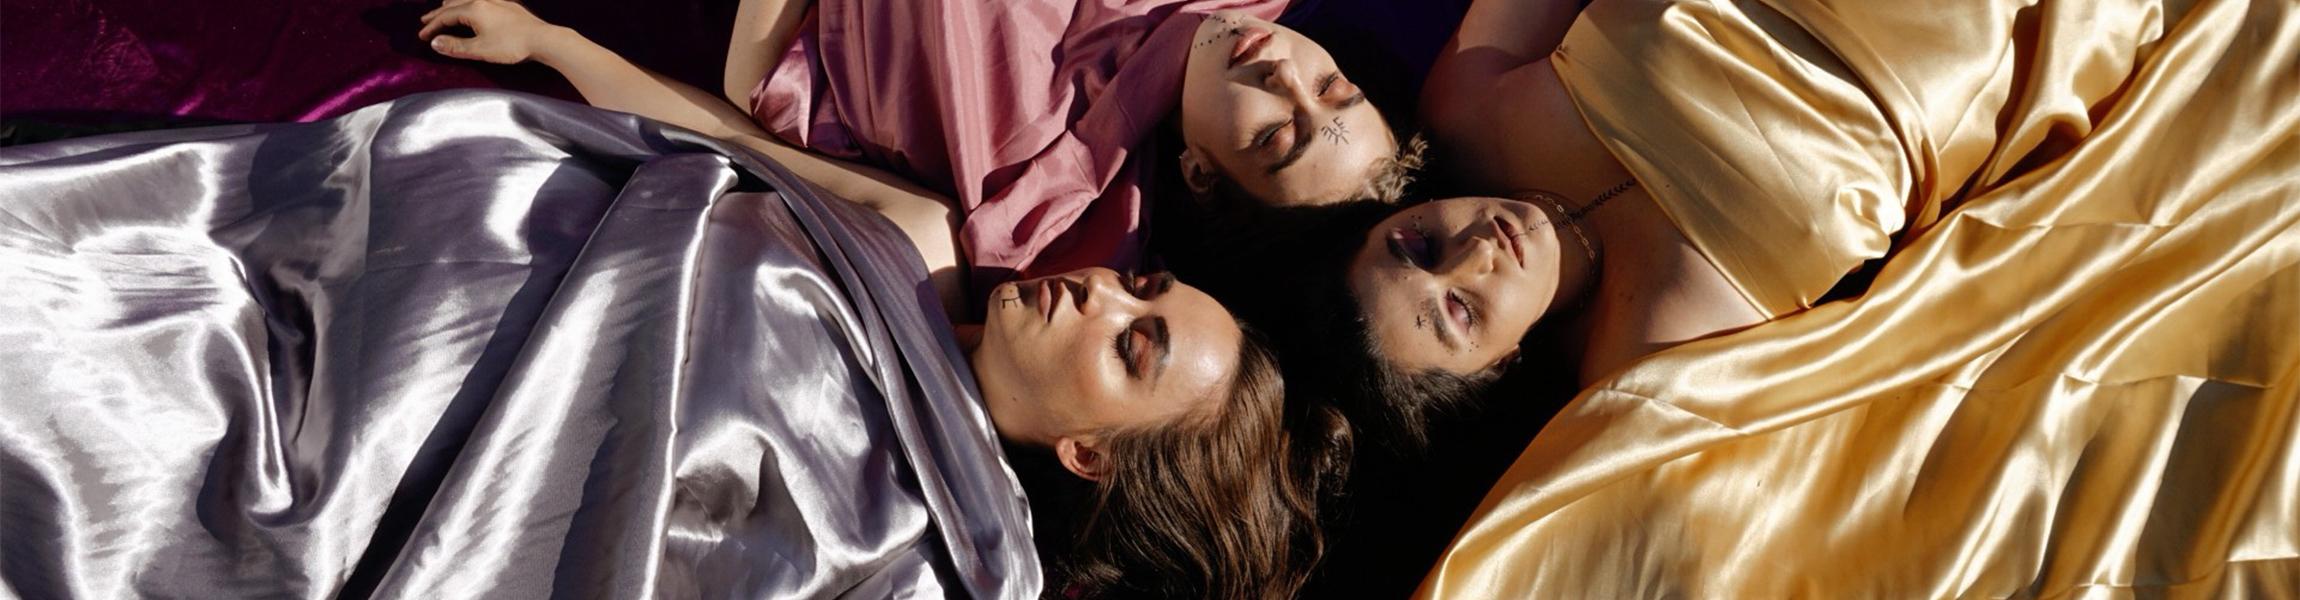 Three Kurdish women lay on their backs, eyes closed and heads all meeting at the center. They are draped in vibrant reflective fabric.